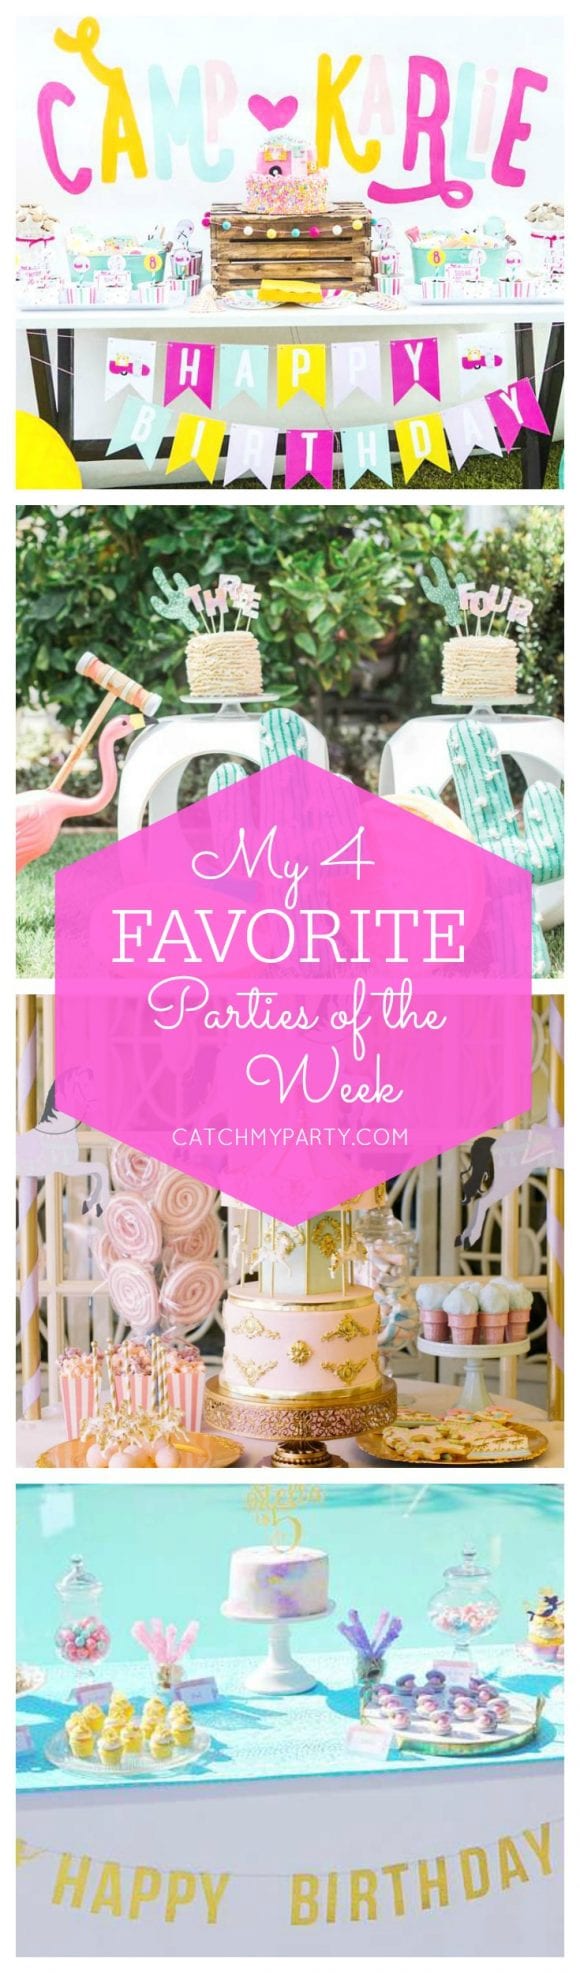 My favorite parties this week include a Girly Glamping birthday party, a Flamingo and Cactus birthday party, a Carousel of Dreams birthday party and a Water Color Mermaid party! | Catchmyparty.com